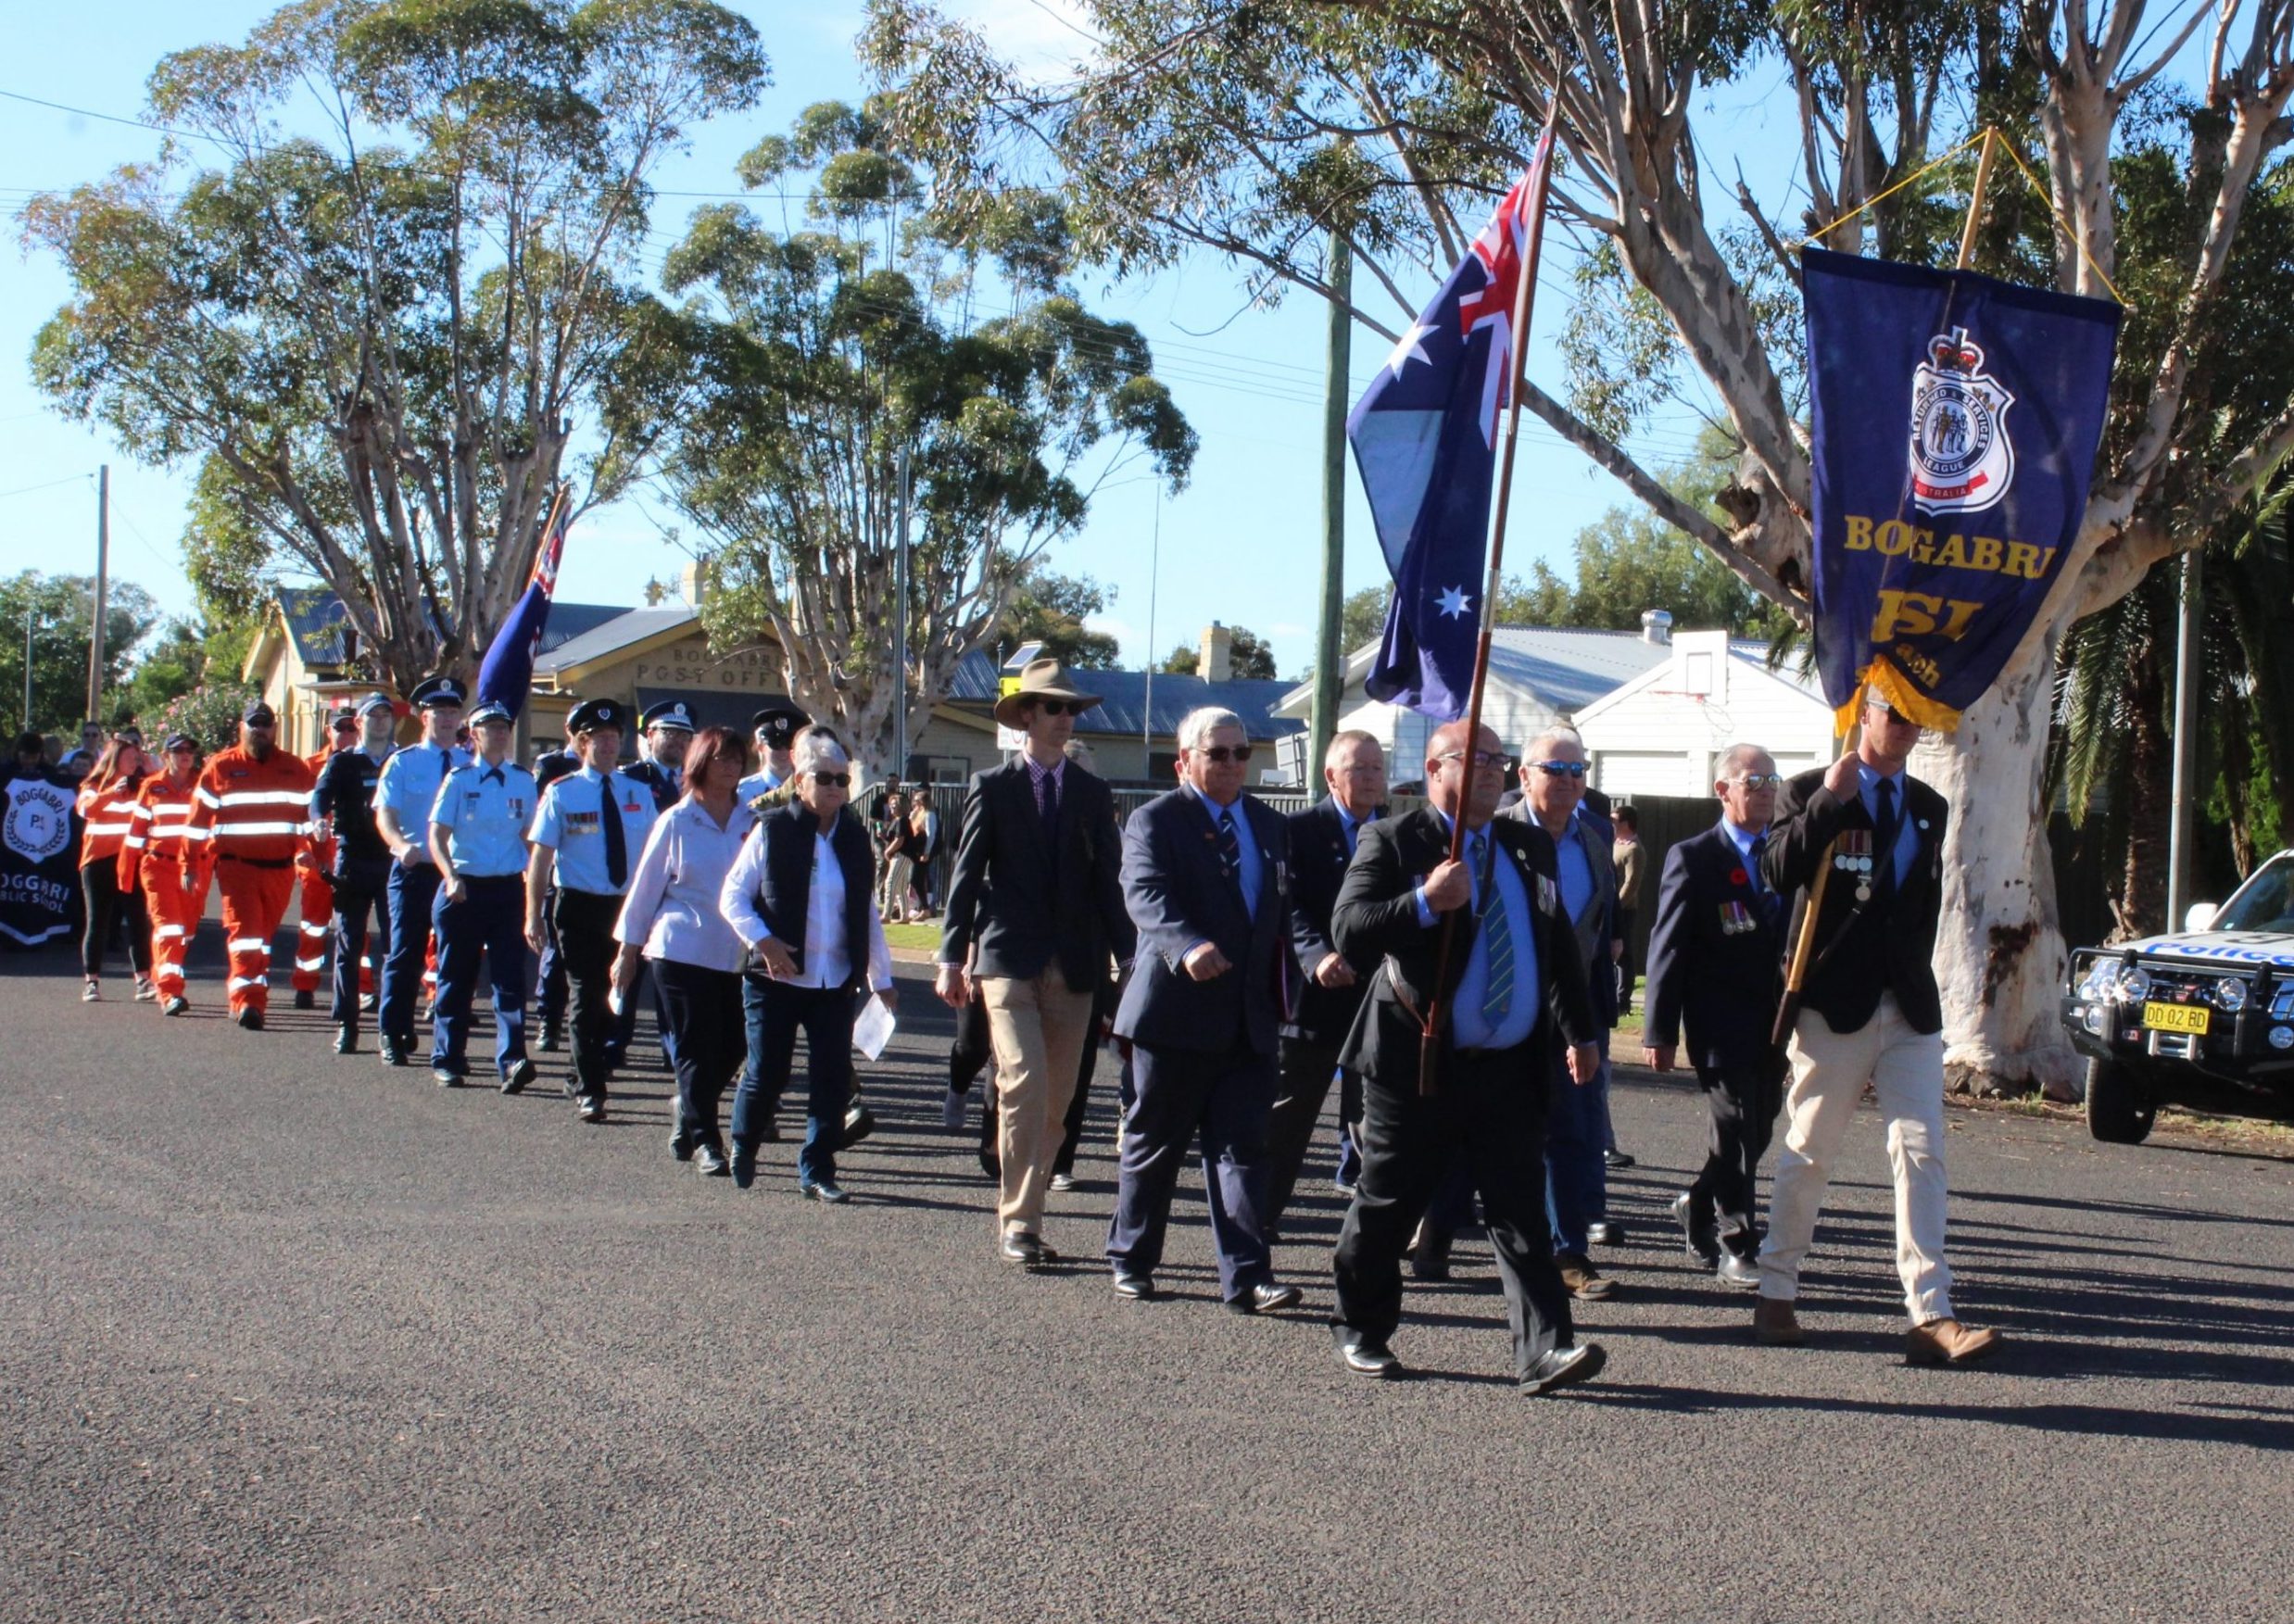 Large crowd at Boggabri’s Anzac Day commemoration